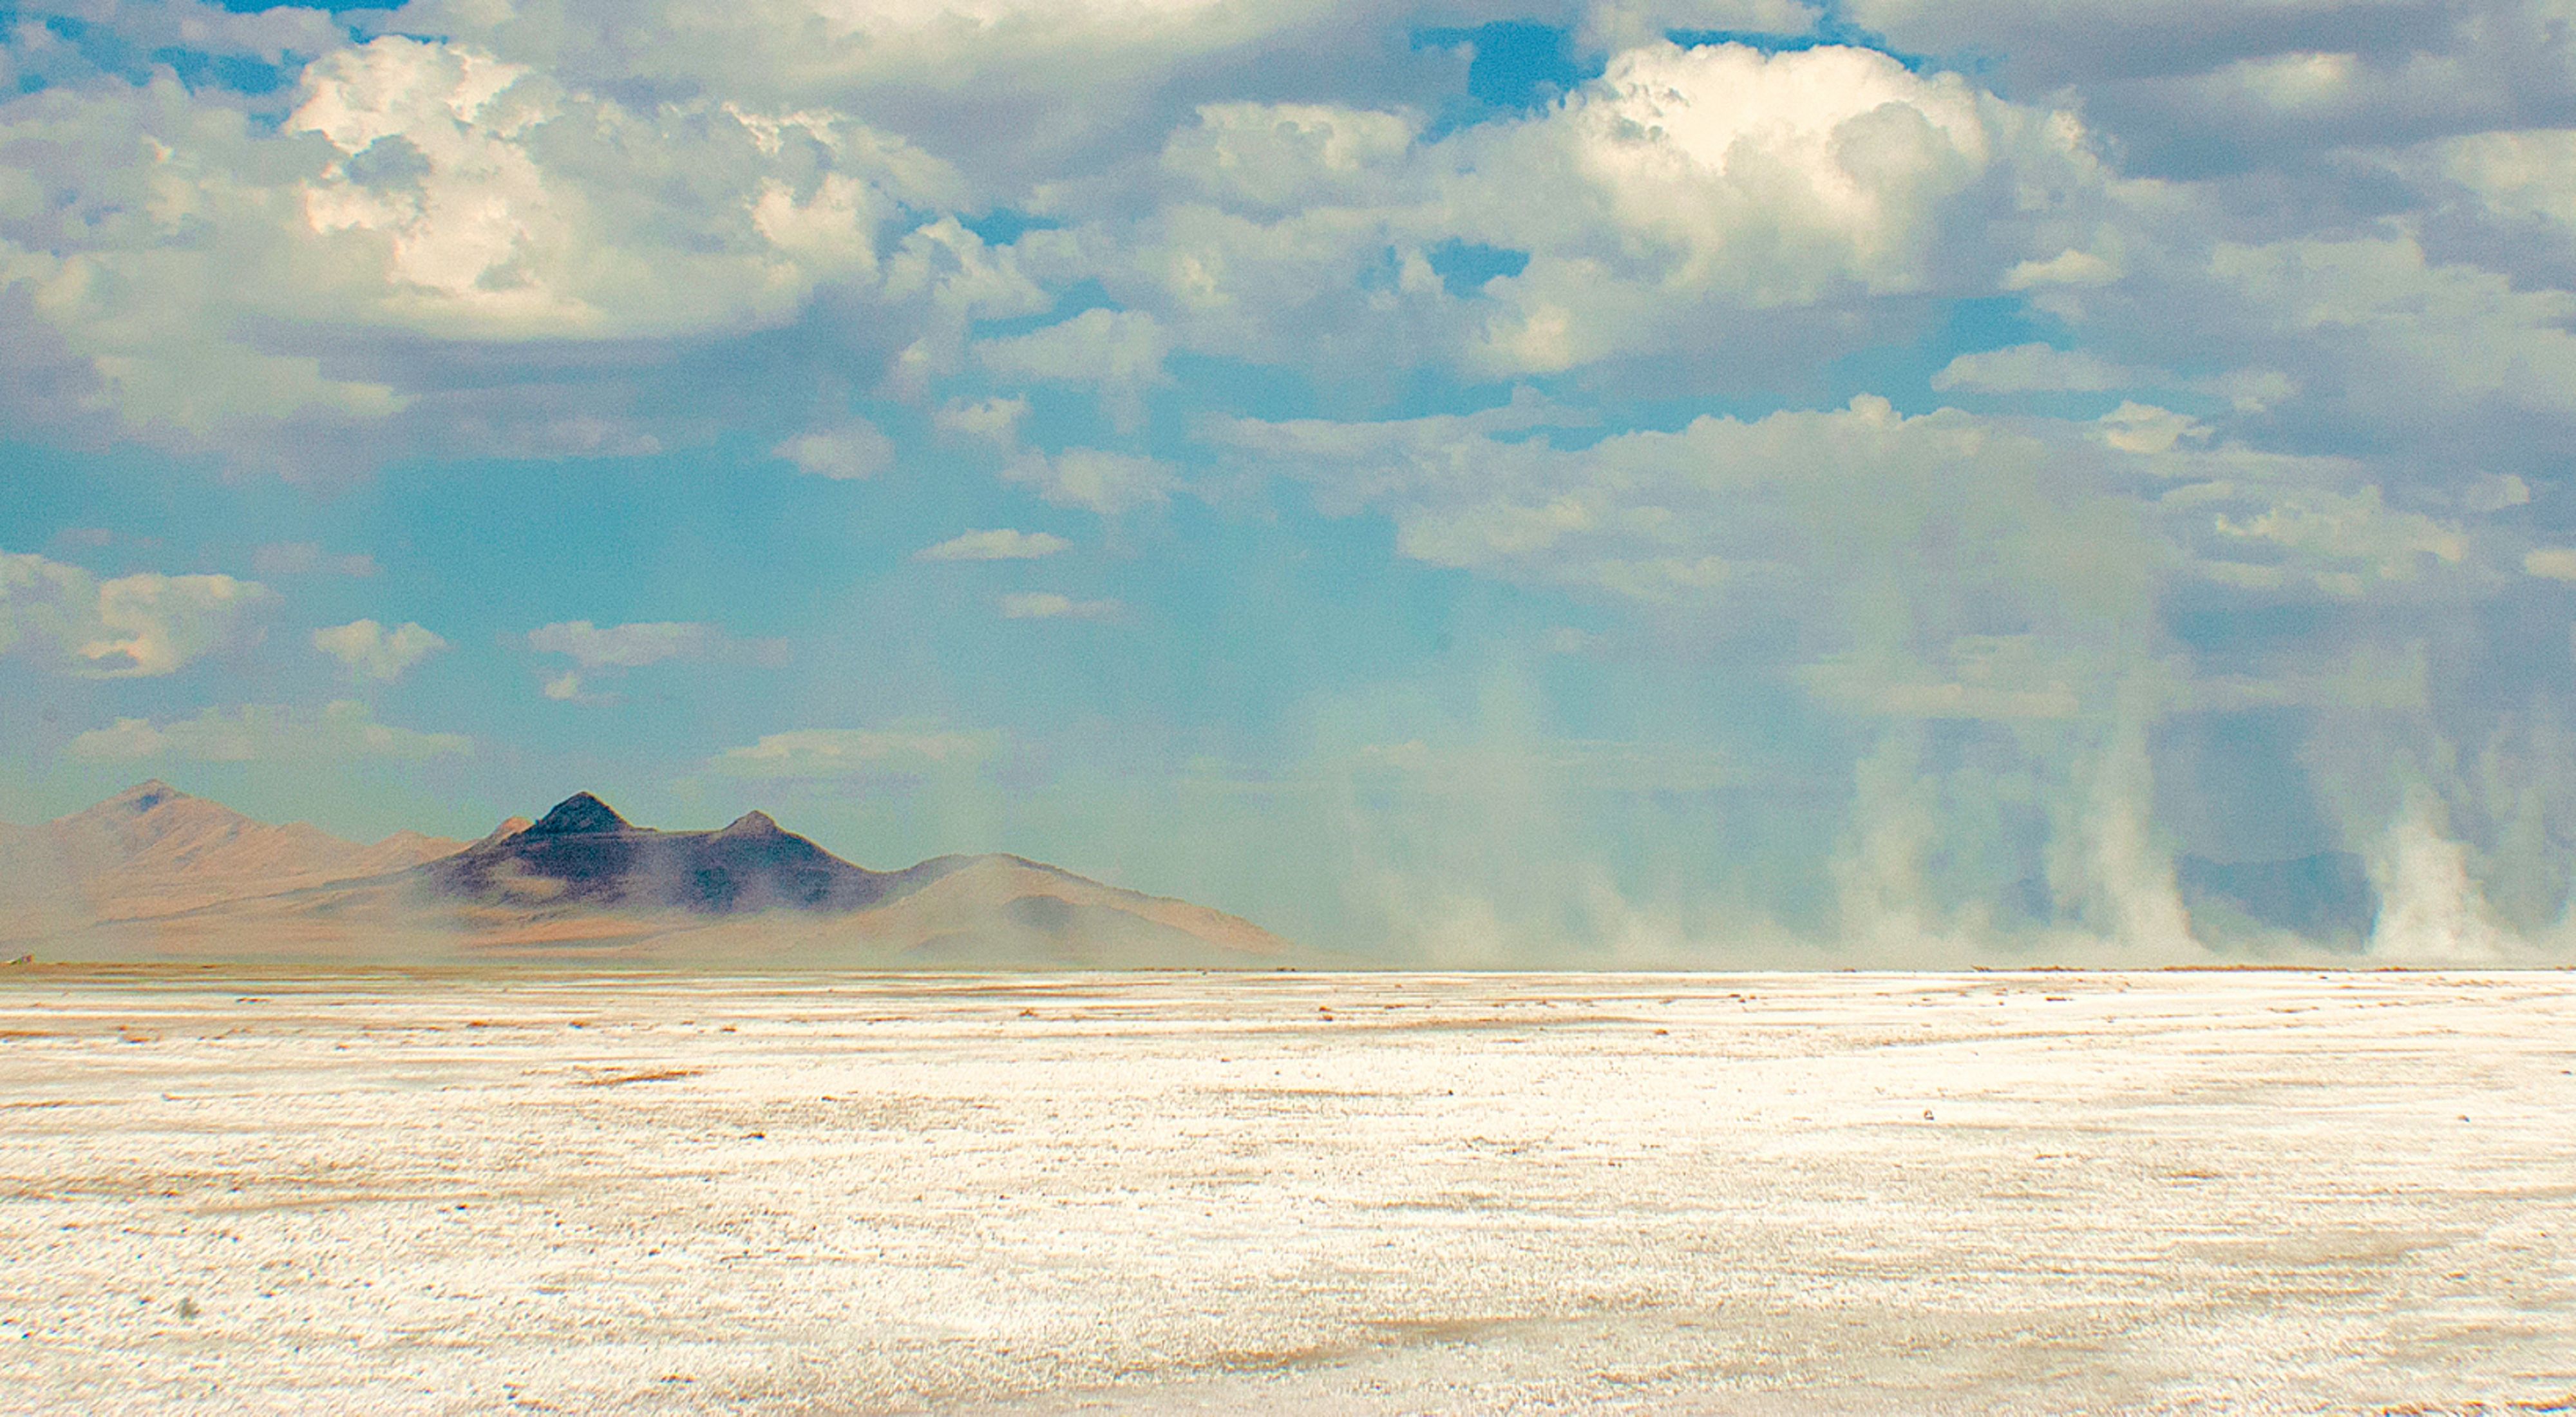 Dust and sand blown by wind across a white dry lakebed under cloudy blue skies with a dark mountain in the background. 